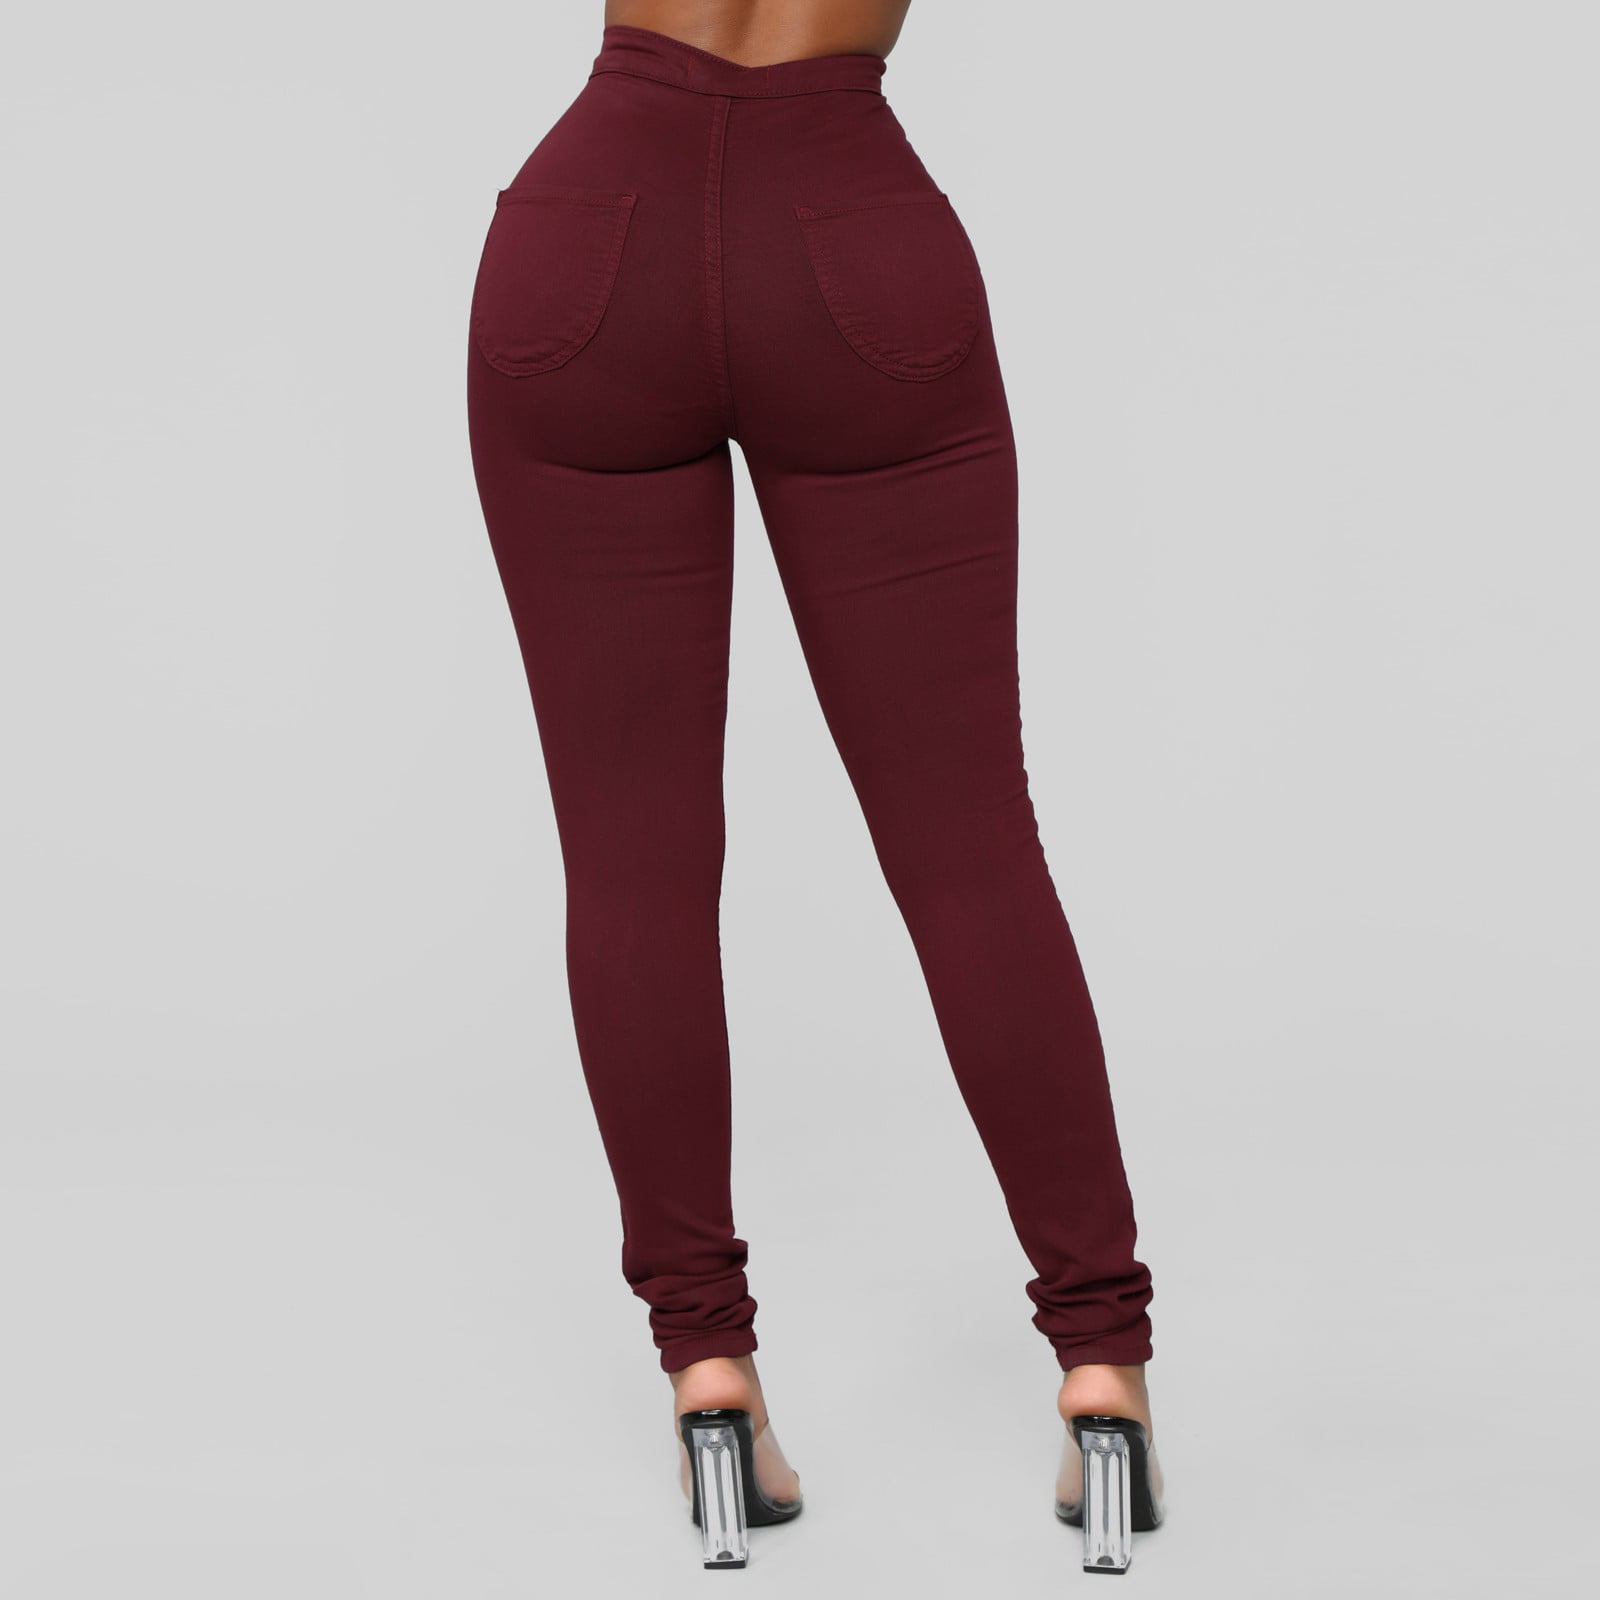 Buy Fablab Women?s Cotton Lycra Stretchable Ankle Length Leggings Combo  Pack of 4(ALL-4-W+M+Dg+Sb,White+Maroon+DarkGreen+SkyBlue,Fit to Waist  28Inch to 34Inch) Online In India At Discounted Prices